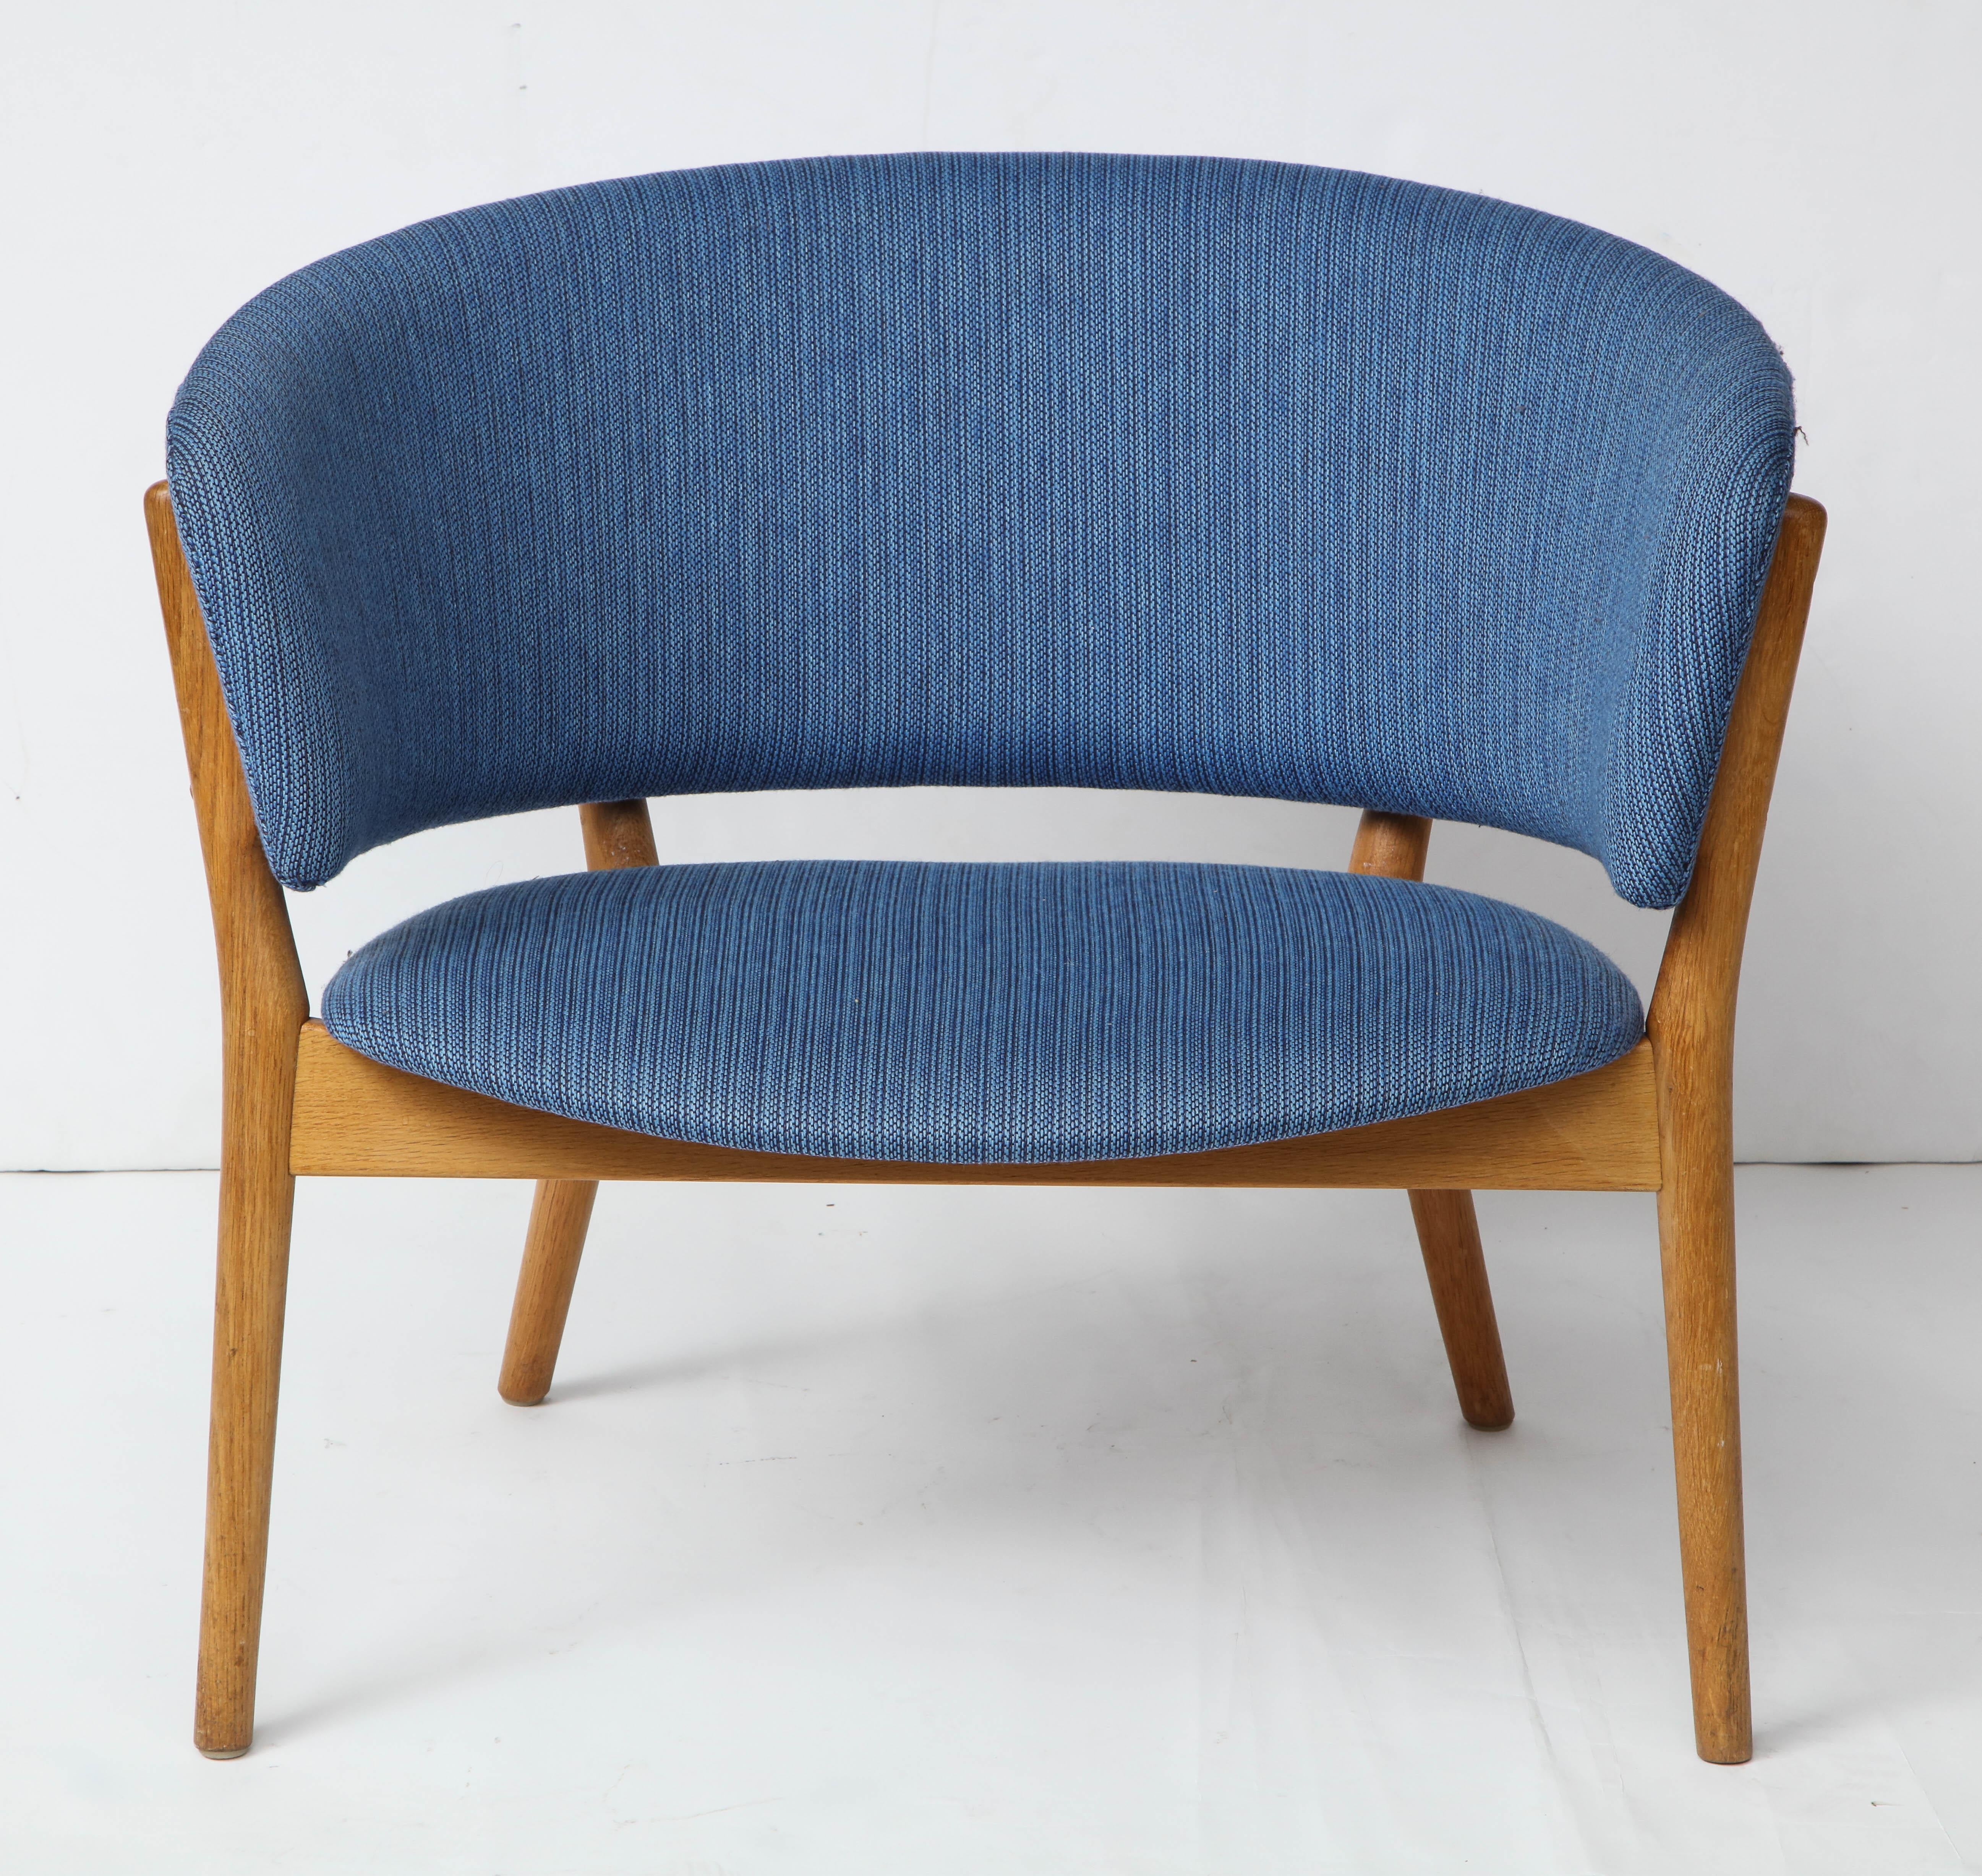 Ditzel was nicknamed the “First Lady of Danish Furniture Design” by the Scandinavian Furniture Fair. These chairs are a Fine example of her outstanding design skills in addition to being very comfortable and versatil.